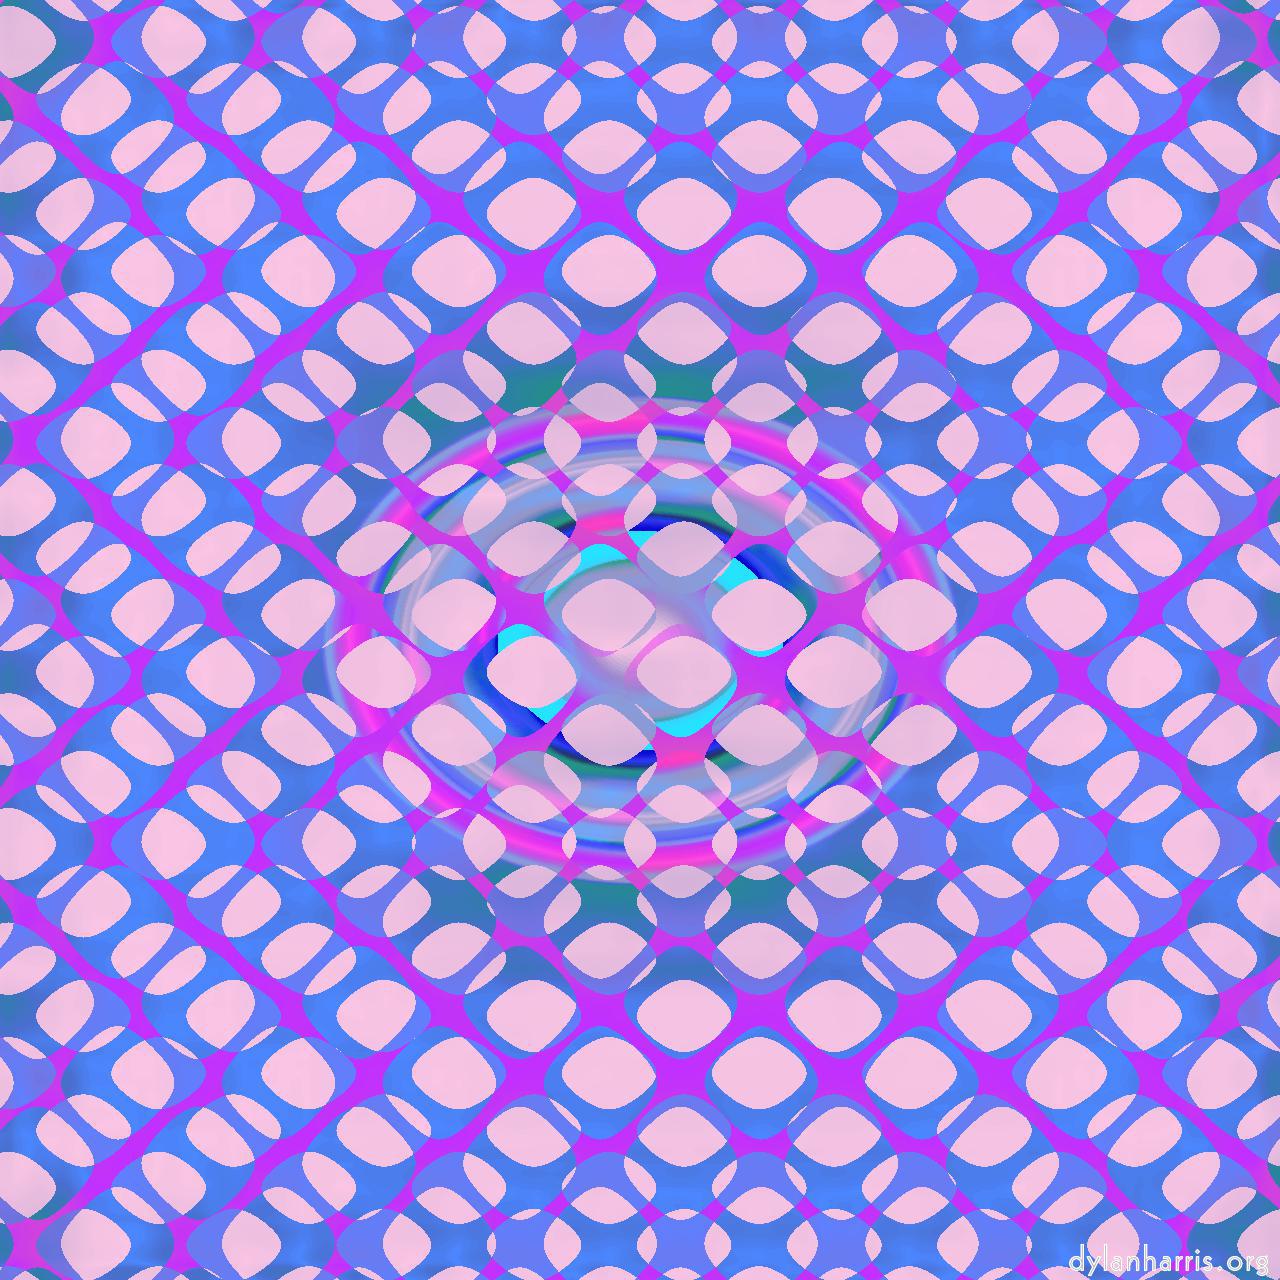 image: op art 1 :: shifted grids